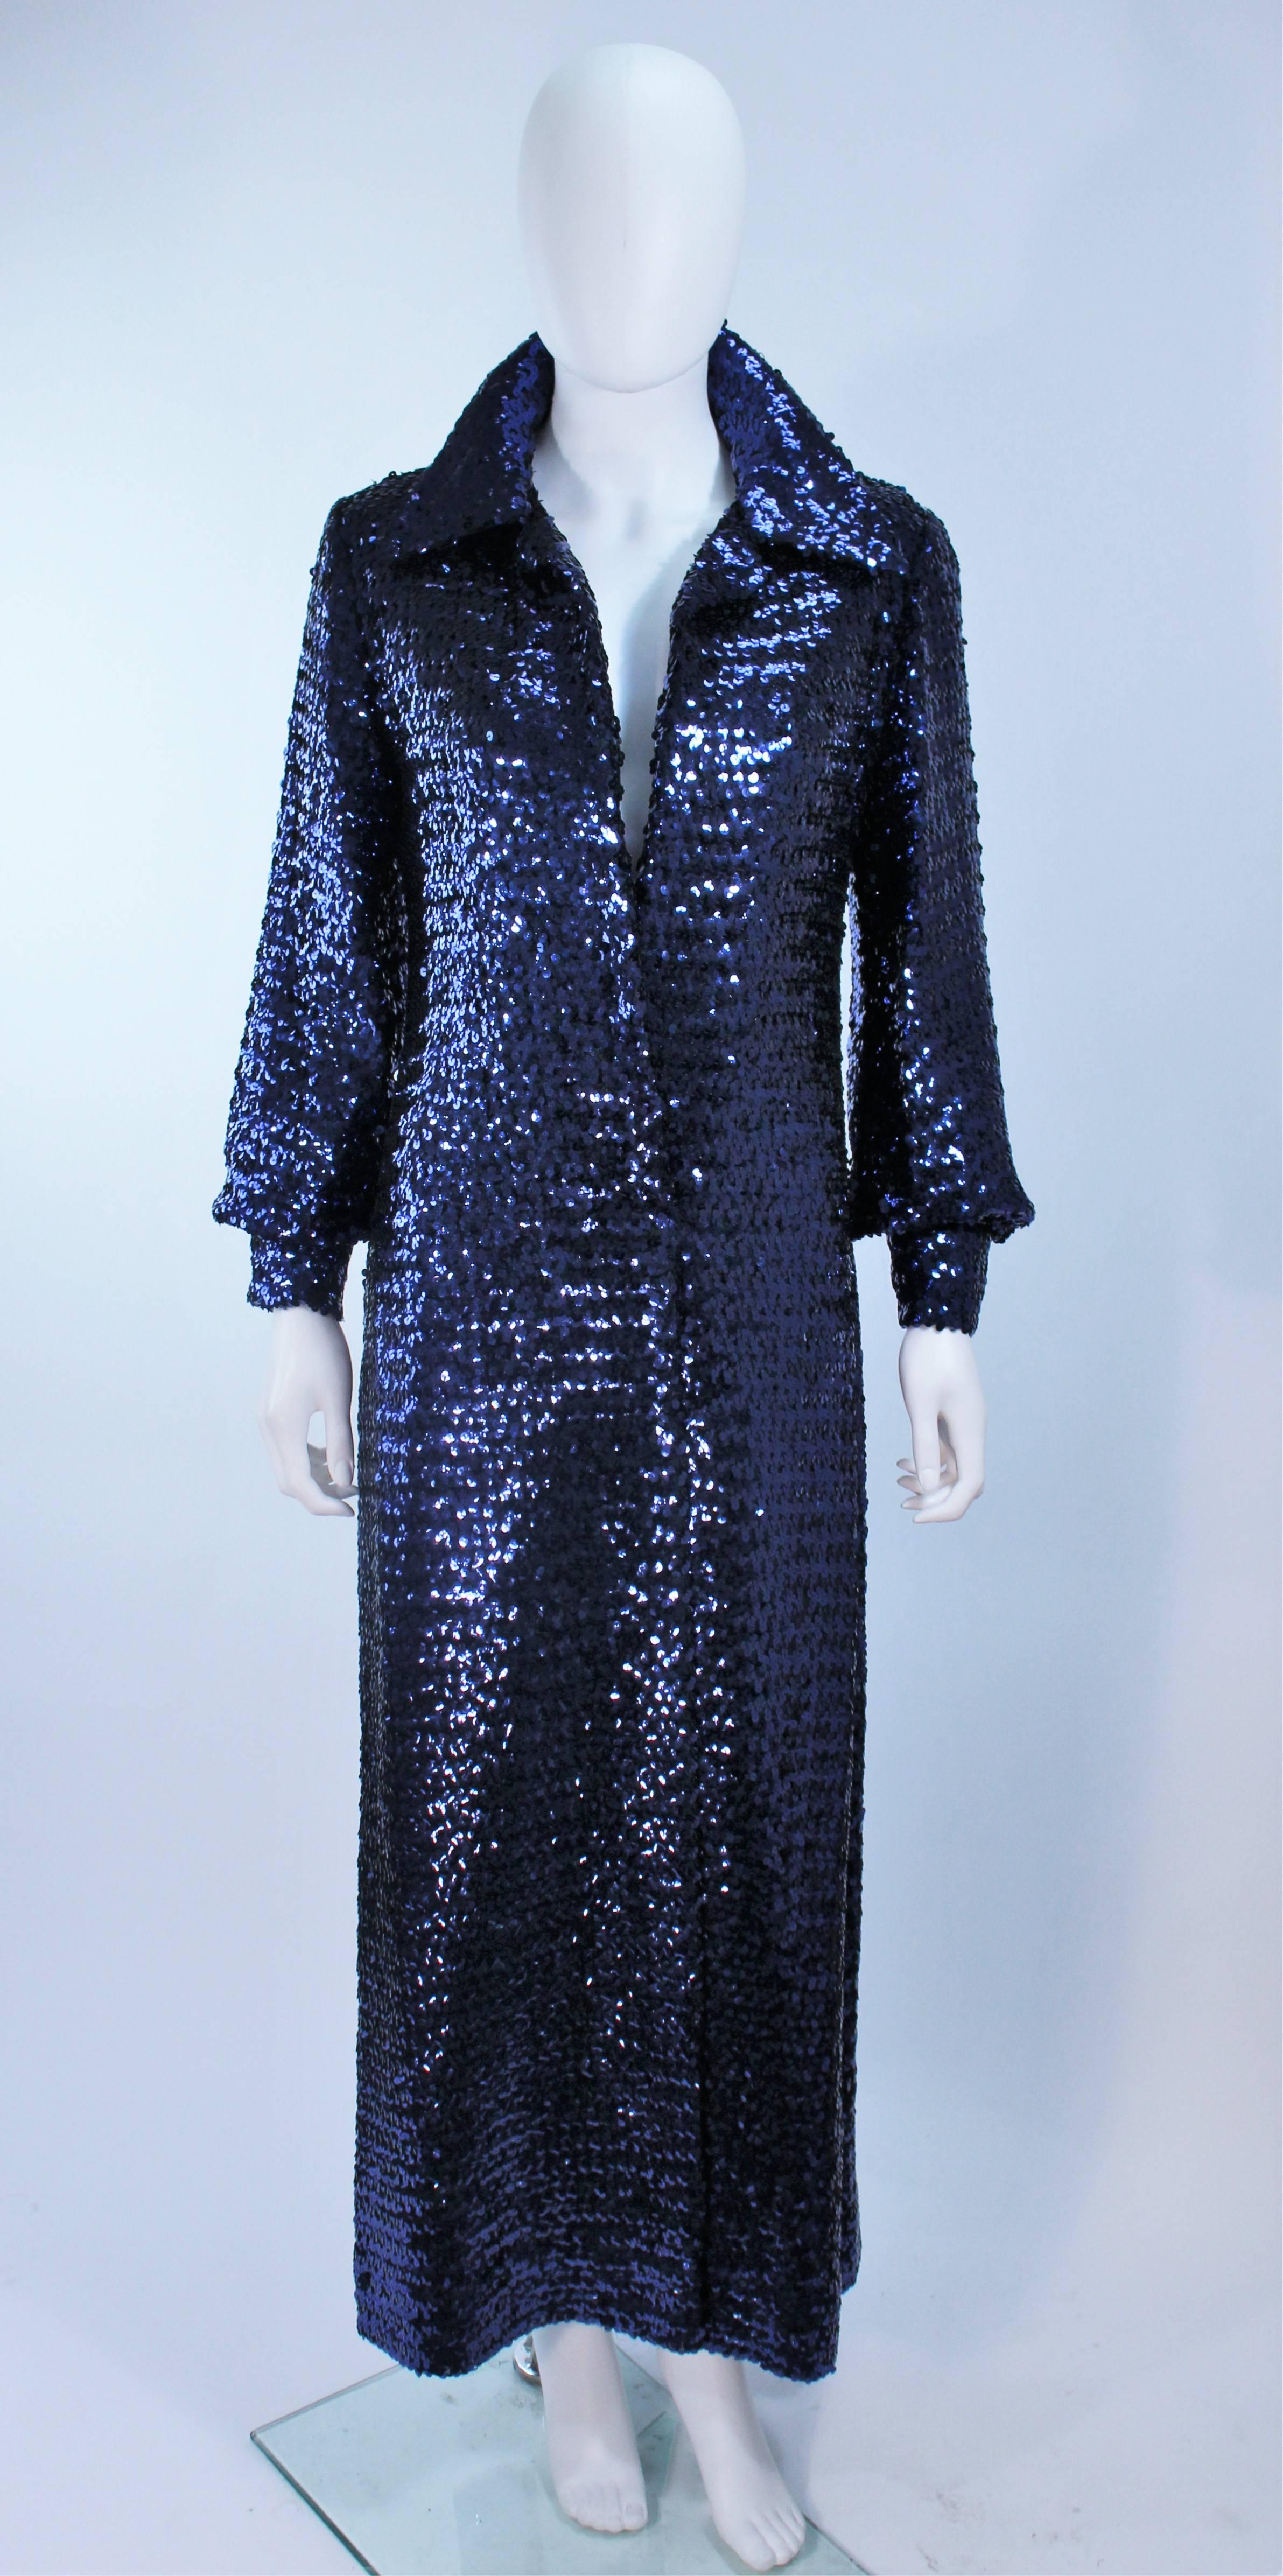 This vintage Jill Richards  coat is composed of blue sequins with a floor length style. Features two center front snap closures with snap closures at the sleeves as well. Sleeves have a slight billow style. In great vintage condition, the lining has